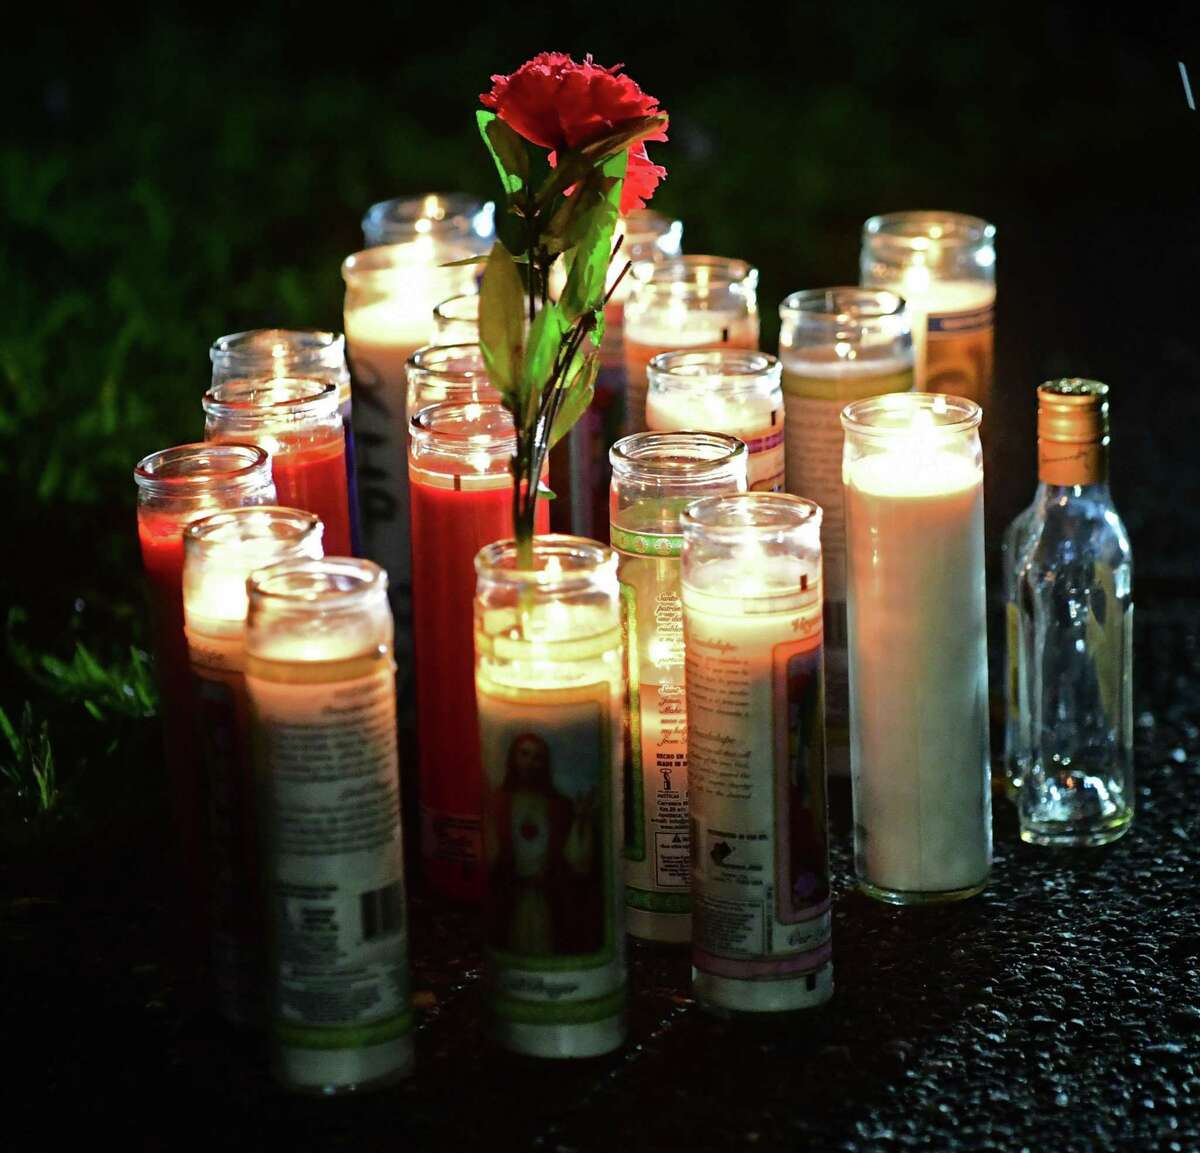 Family members gather to hold a vigil for the stabbing victim at 39 Faifield Ave. Thursday August 8, 2019, in Norwalk, Conn.